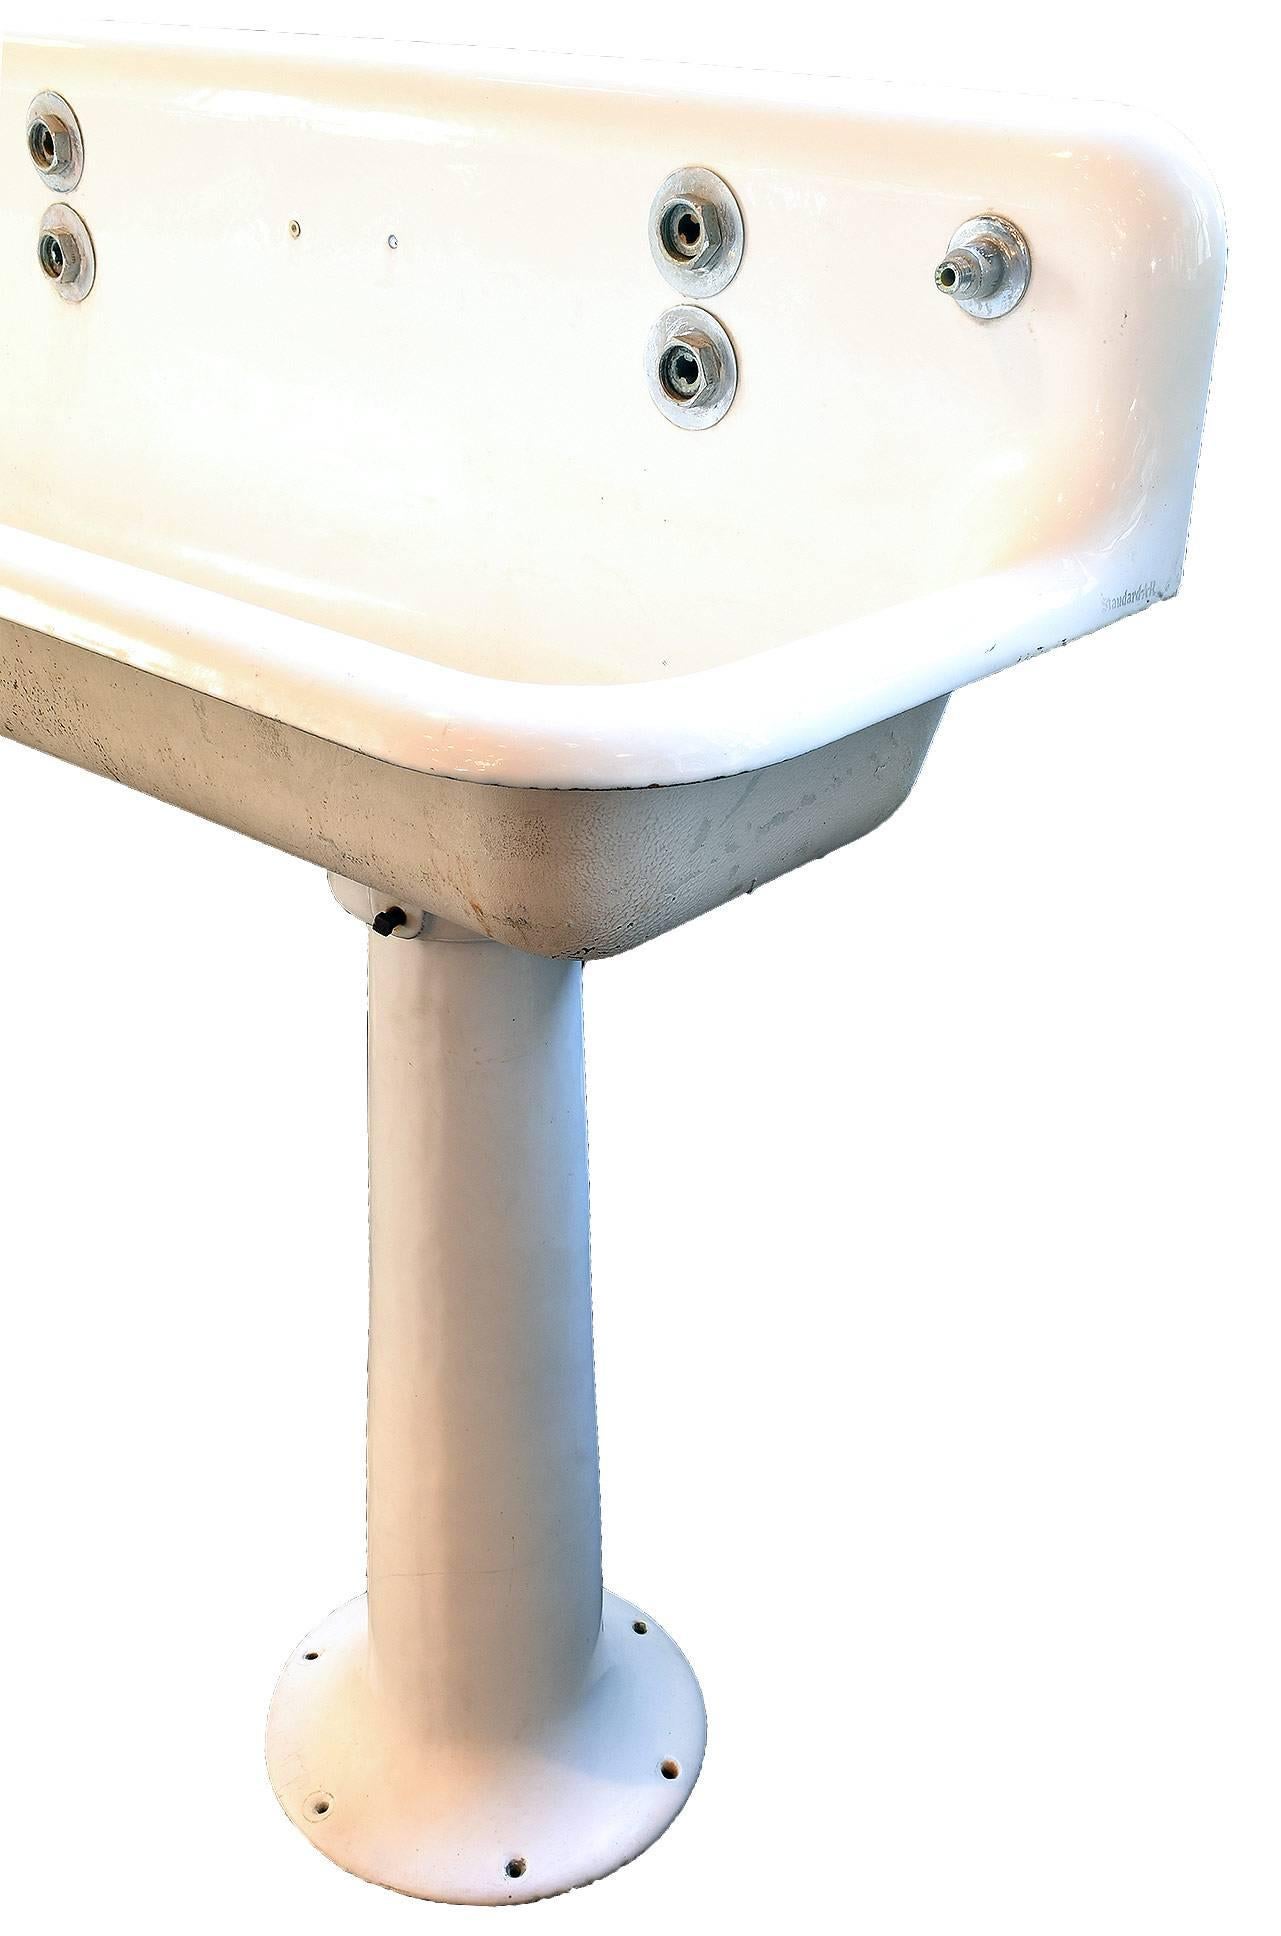 Beautiful pedestal porcelain sink from American standard with long top and pedestals. 

Measures: Sink: 72